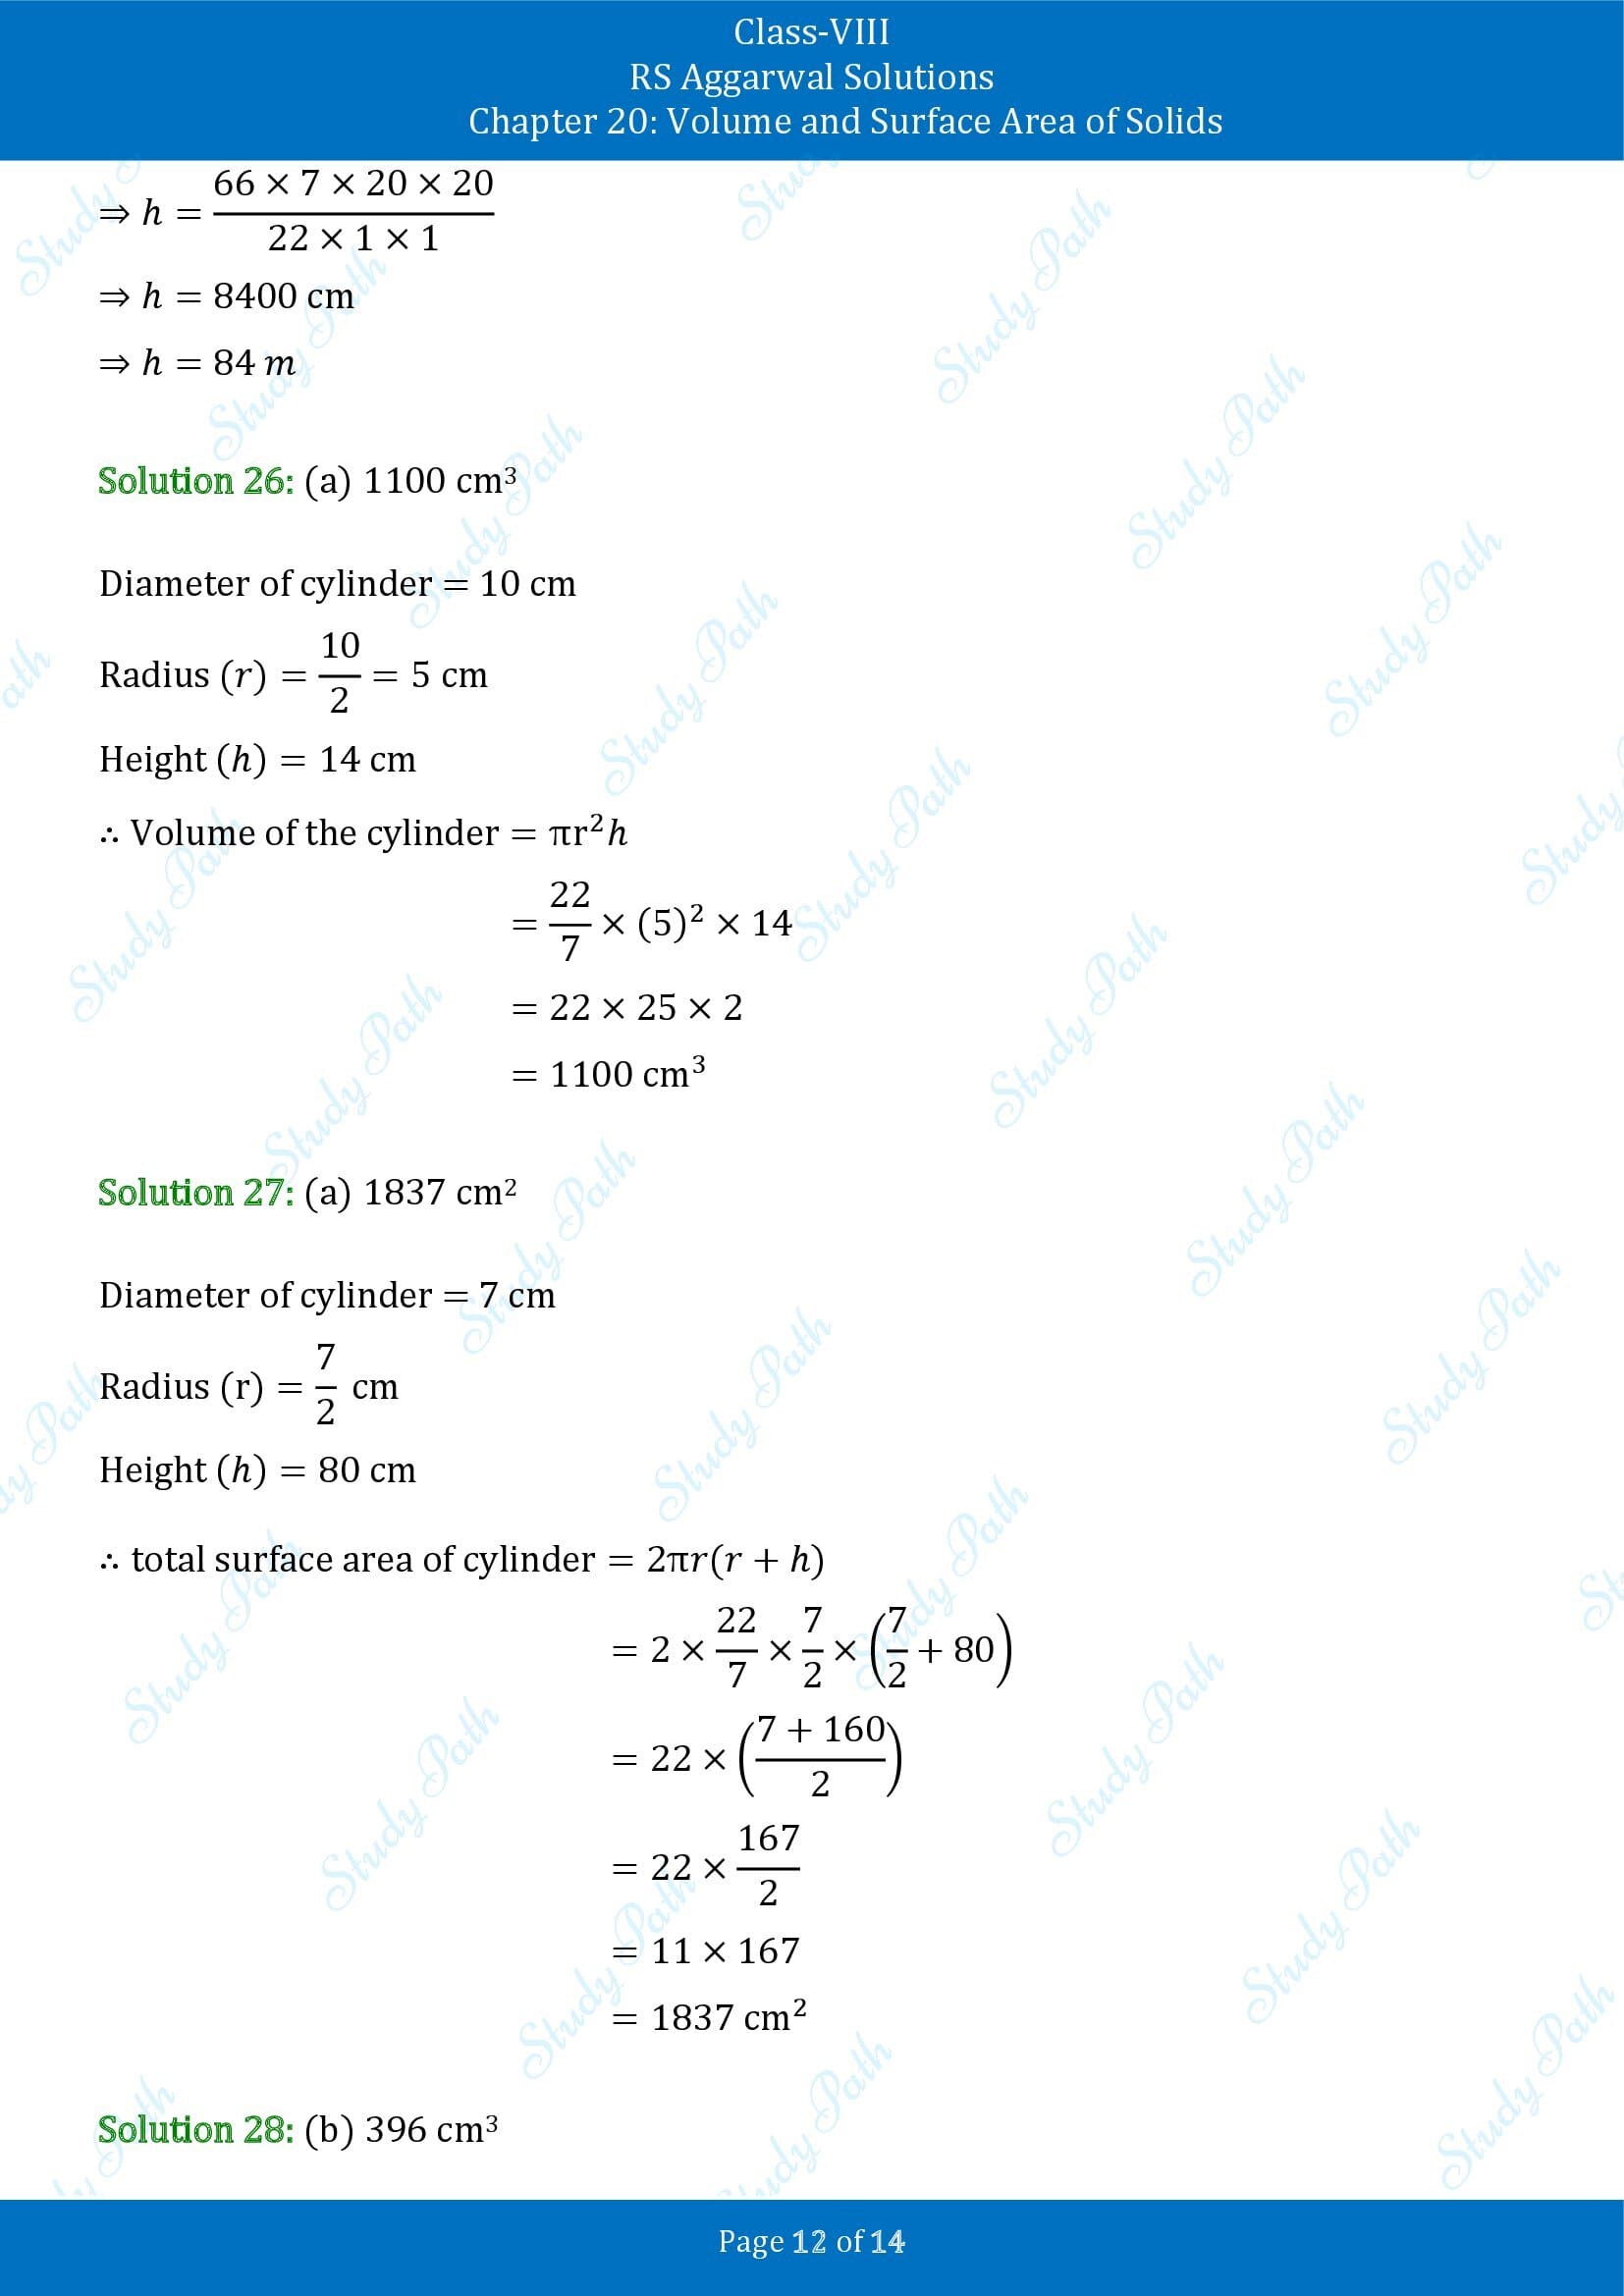 RS Aggarwal Solutions Class 8 Chapter 20 Volume and Surface Area of Solids Exercise 20C MCQs 00012